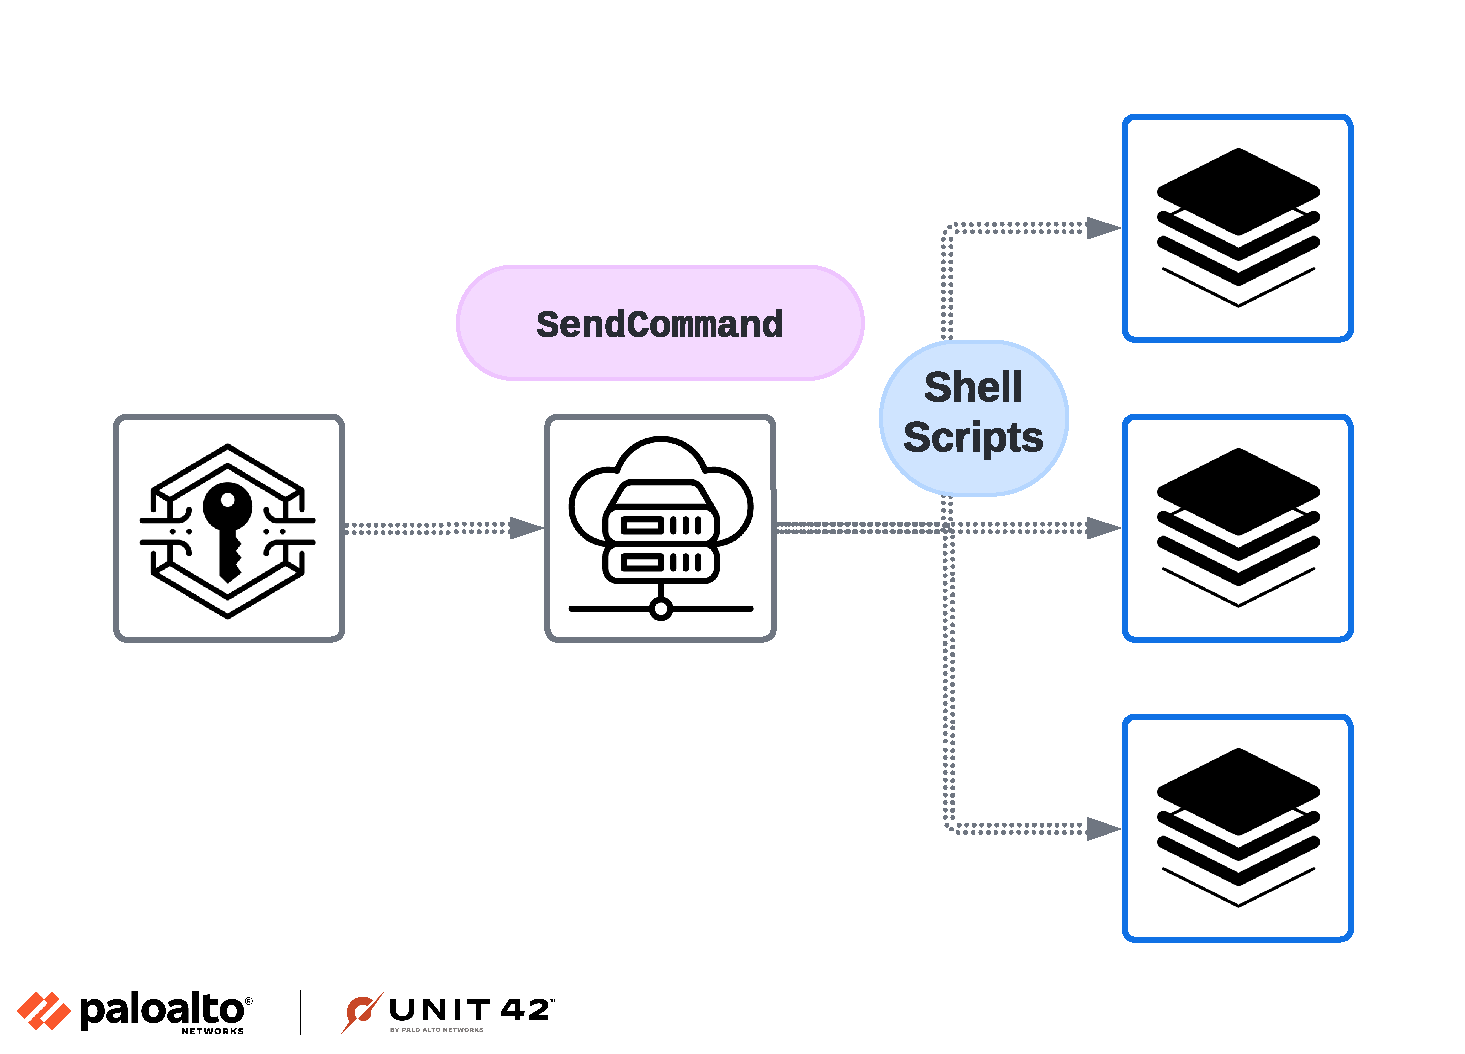 Image 14 is a tree diagram of how a threat actor runs shell commands at scale in the Amazon Web Services Systems Manager. Key icon > cloud server icon > SendCommand > Shell scripts branch into three servers. 